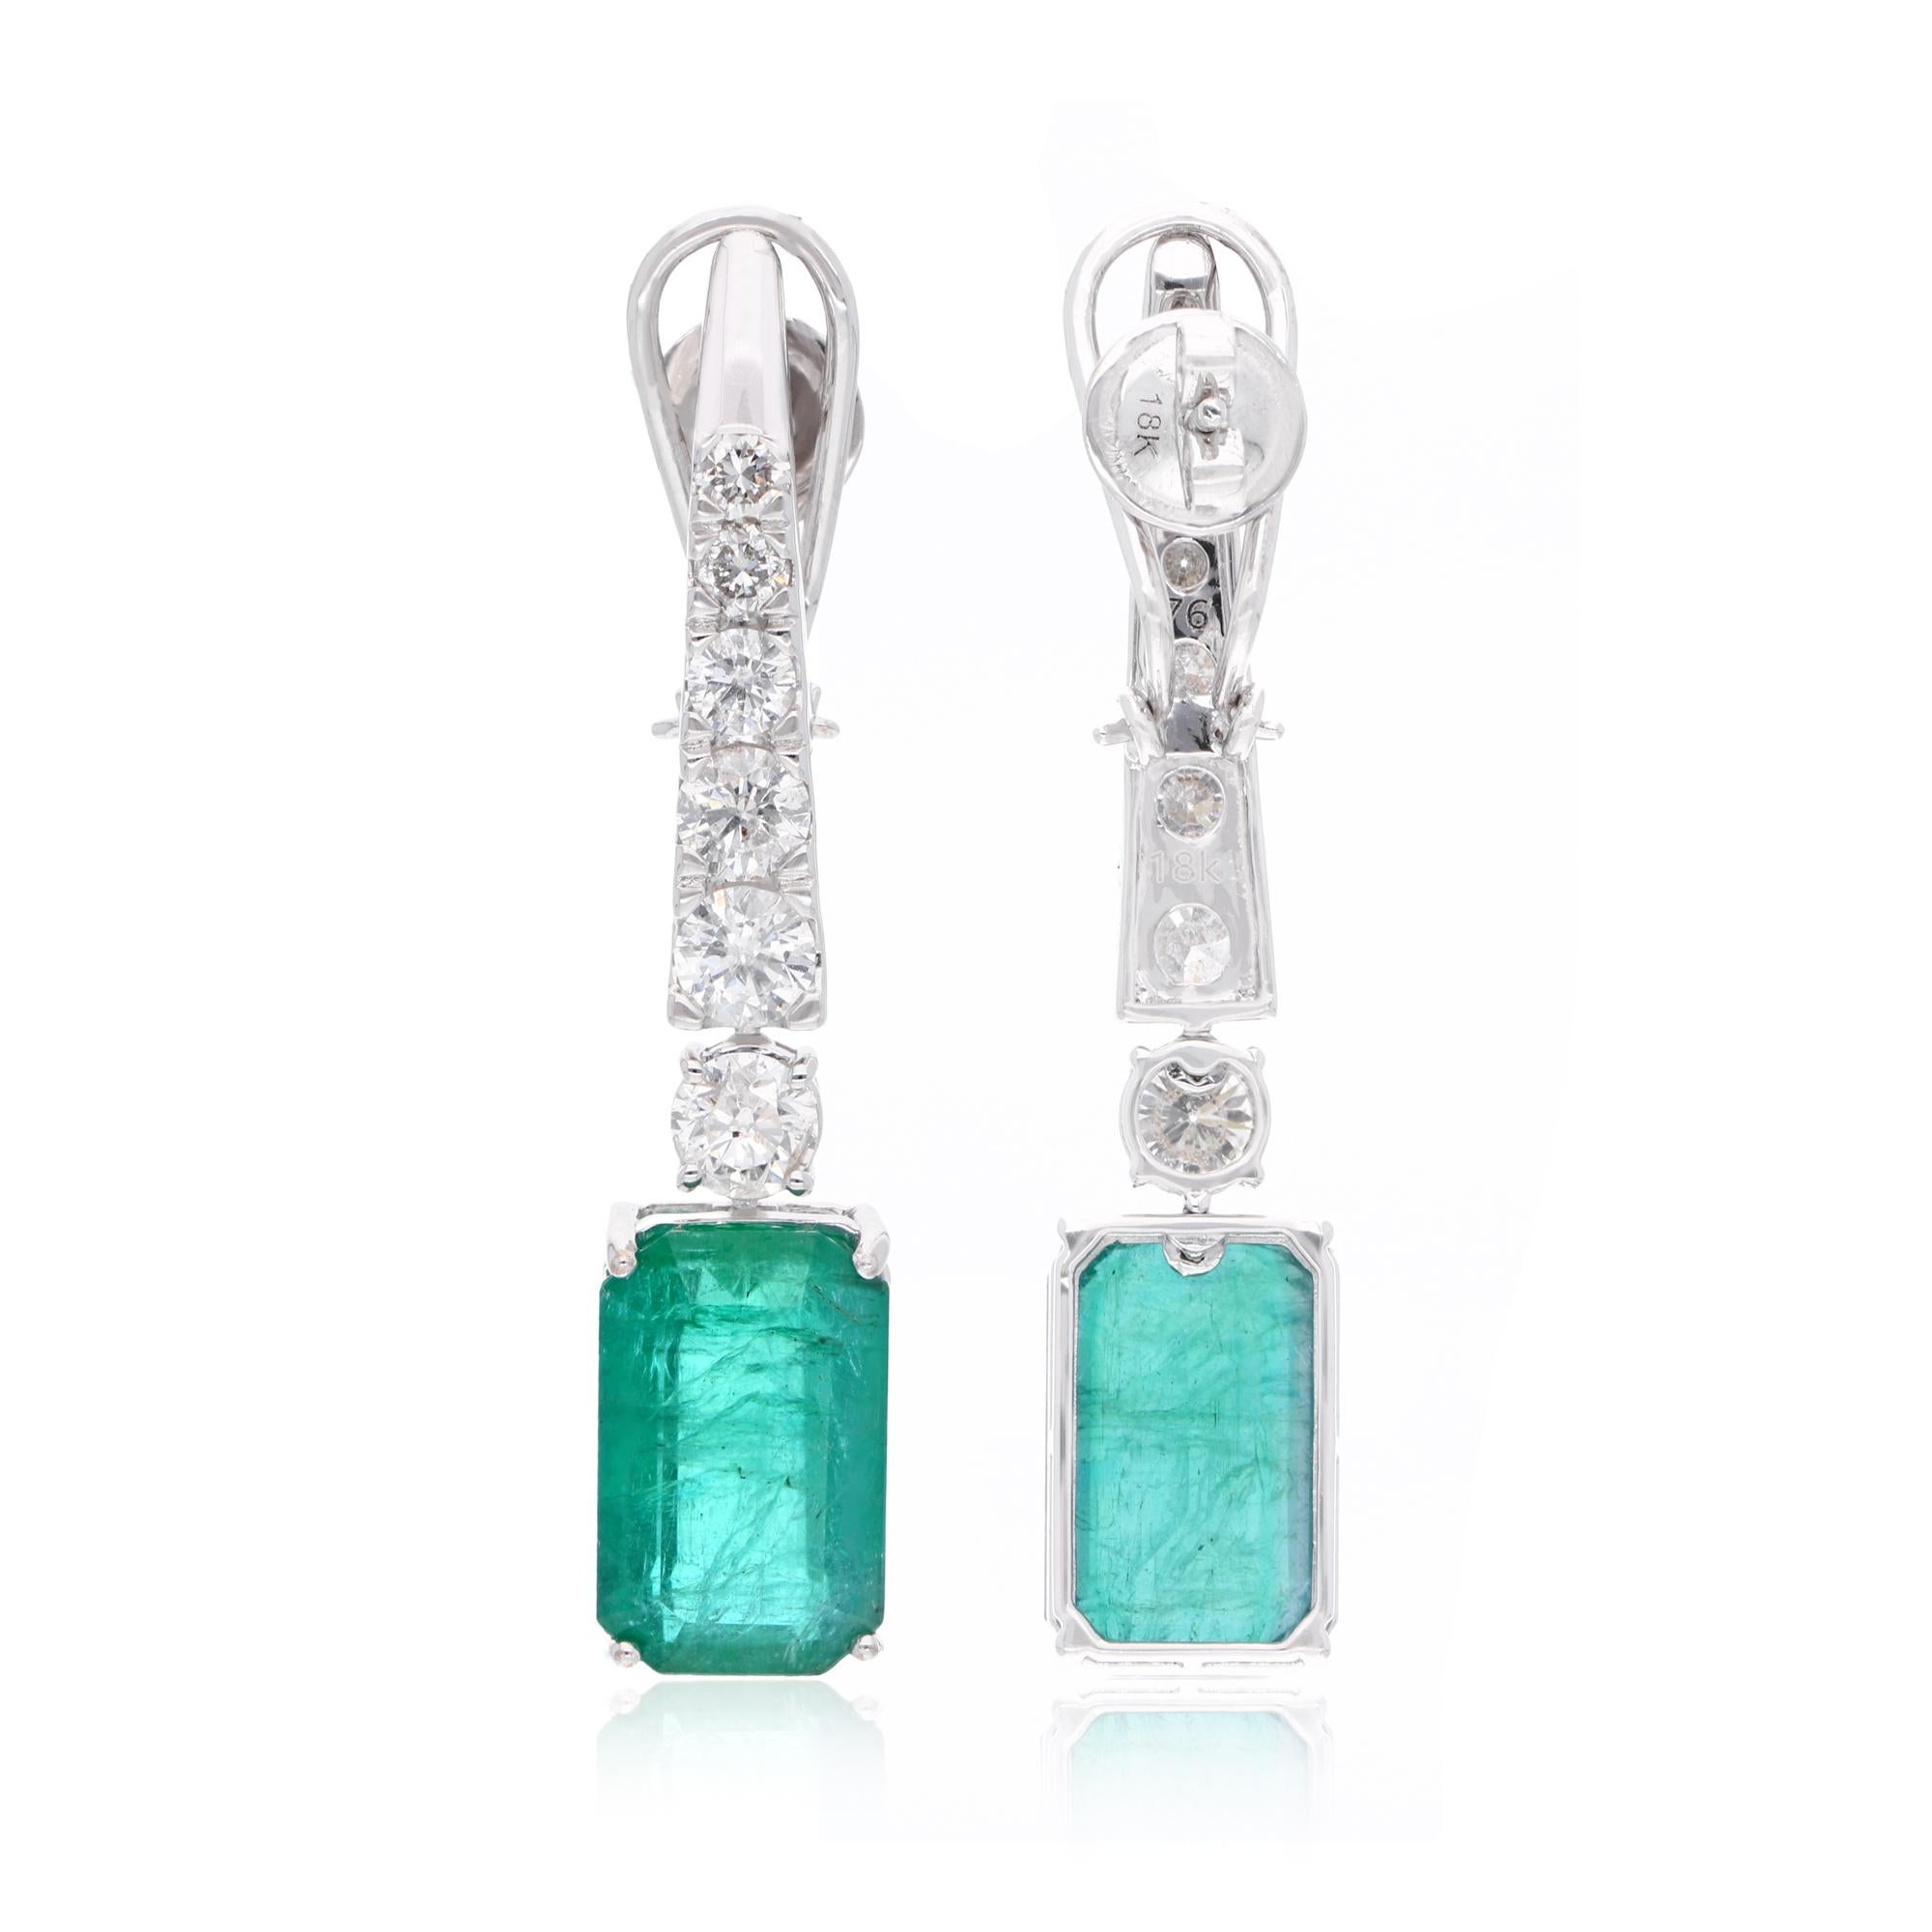 Item Code :- SEE-12635A
Gross Wt. :- 12.98 gm
Solid 18k White Gold Wt. :- 9.40 gm
Natural Diamond Wt. :- 3.06 Ct. ( AVERAGE DIAMOND CLARITY SI1-SI2 & COLOR H-I )
Emerald Wt. :- 14.84 Ct.
Earrings Size :- 45 mm approx.

✦